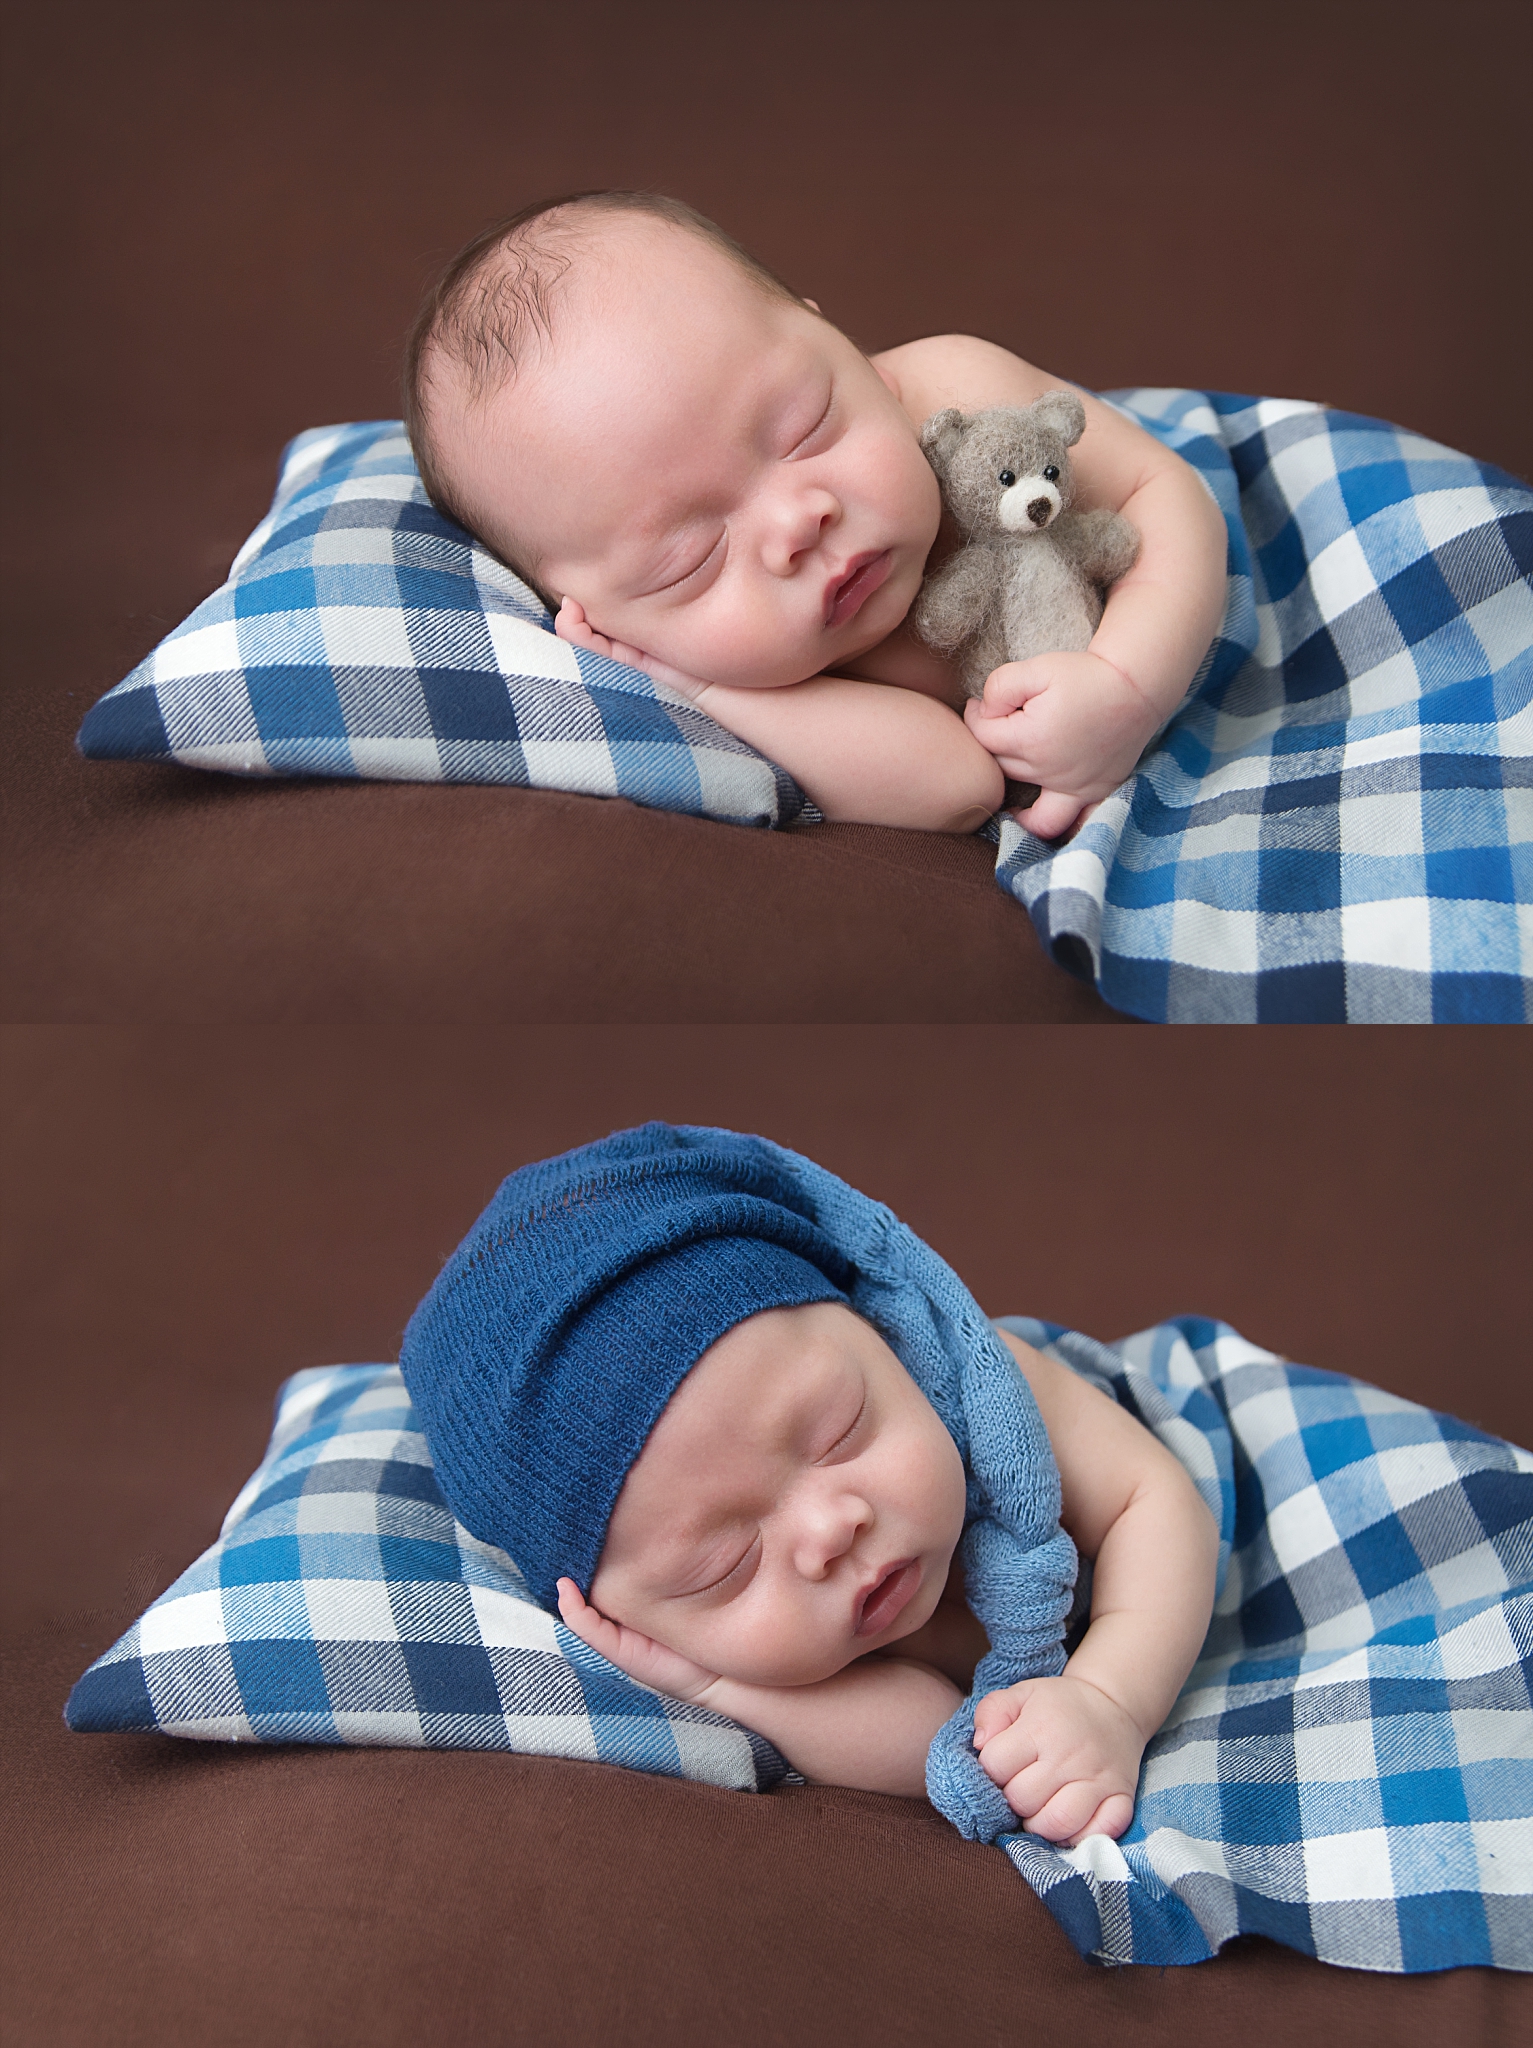 st-louis-newborn-photographer-baby-boy-with-blue-plaid-pillow-and-blanket.jpg